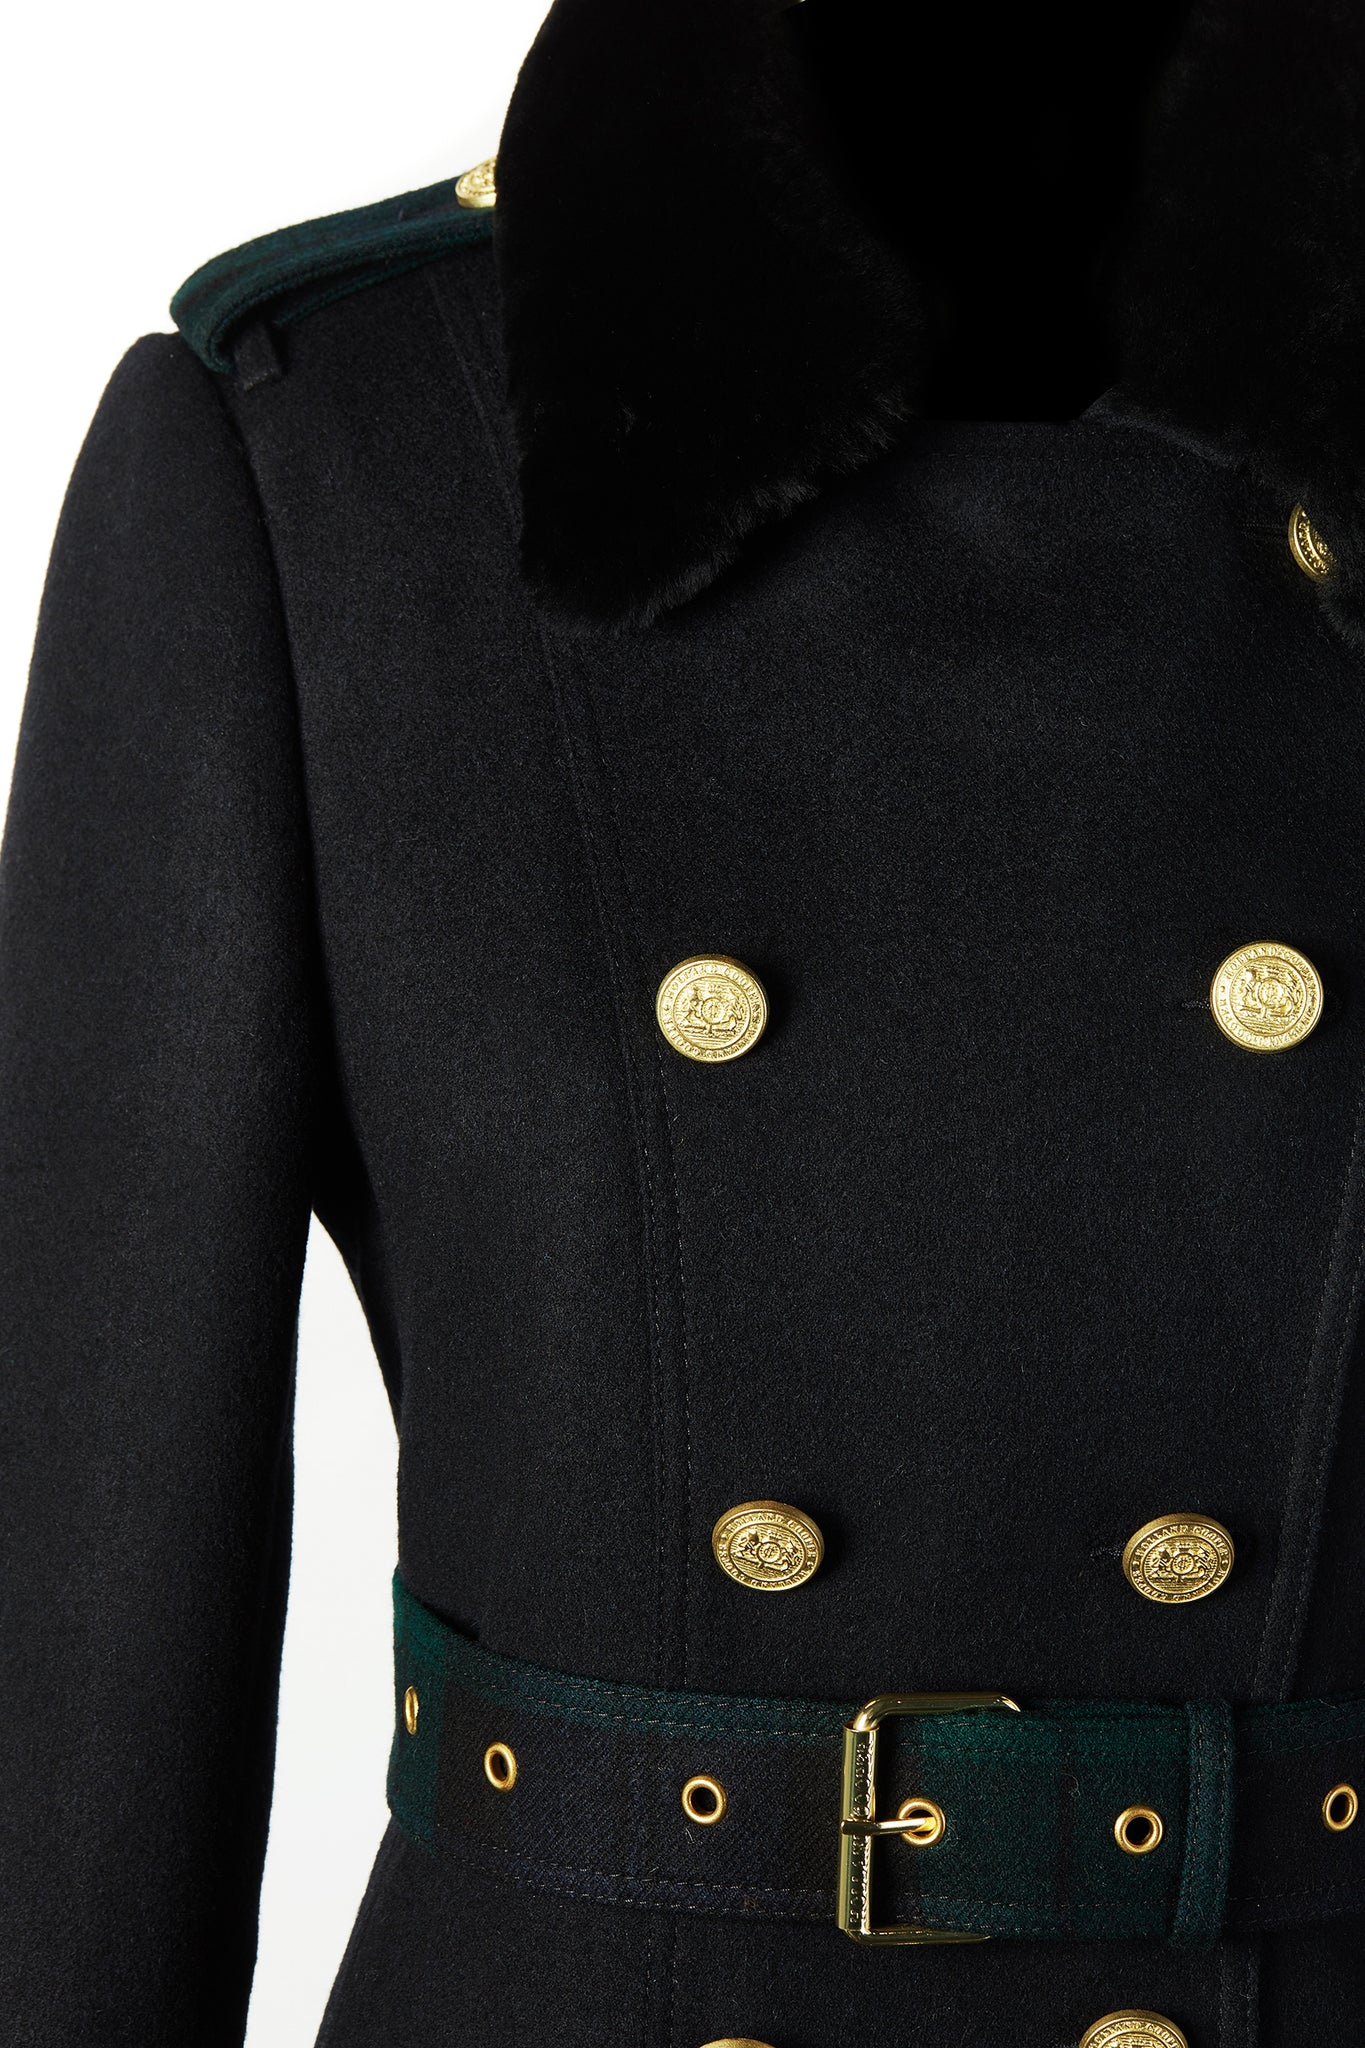 gold button and belt detail of womens navy and green blackwatch houndstooth double breasted full length trench coat with black faux fur collar and cuffs